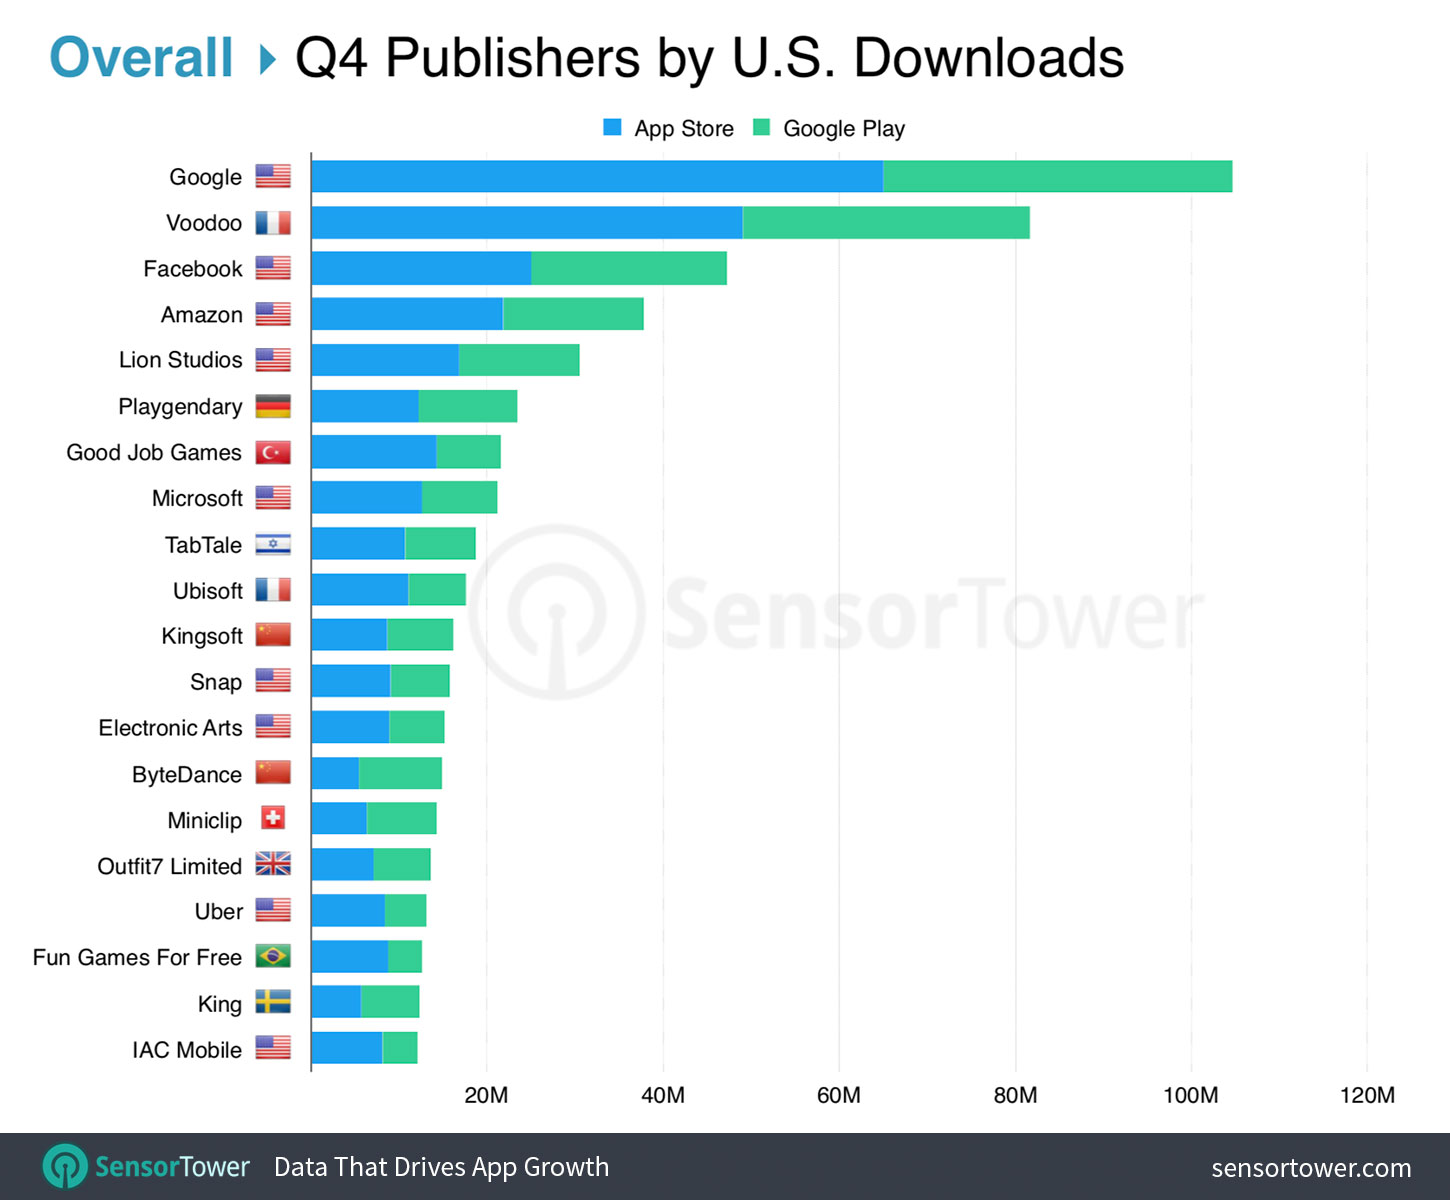 Top App Publishers in the U.S. for Q4 2018